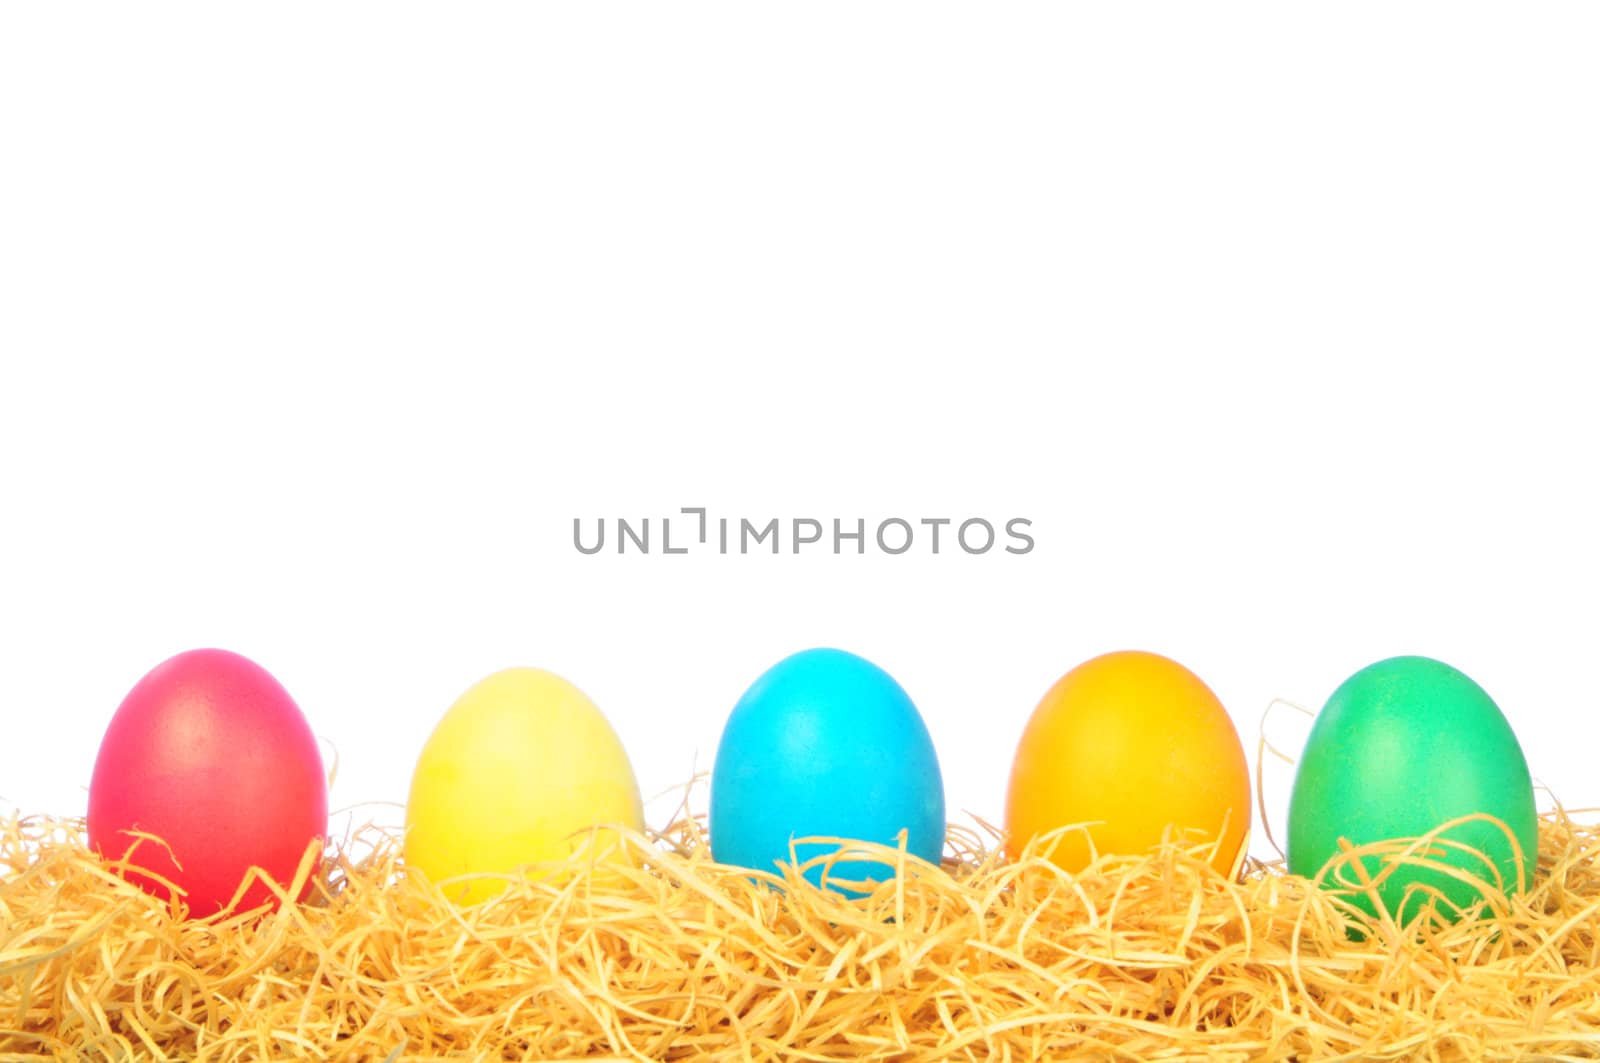 five painted eggs on a straw on a white background